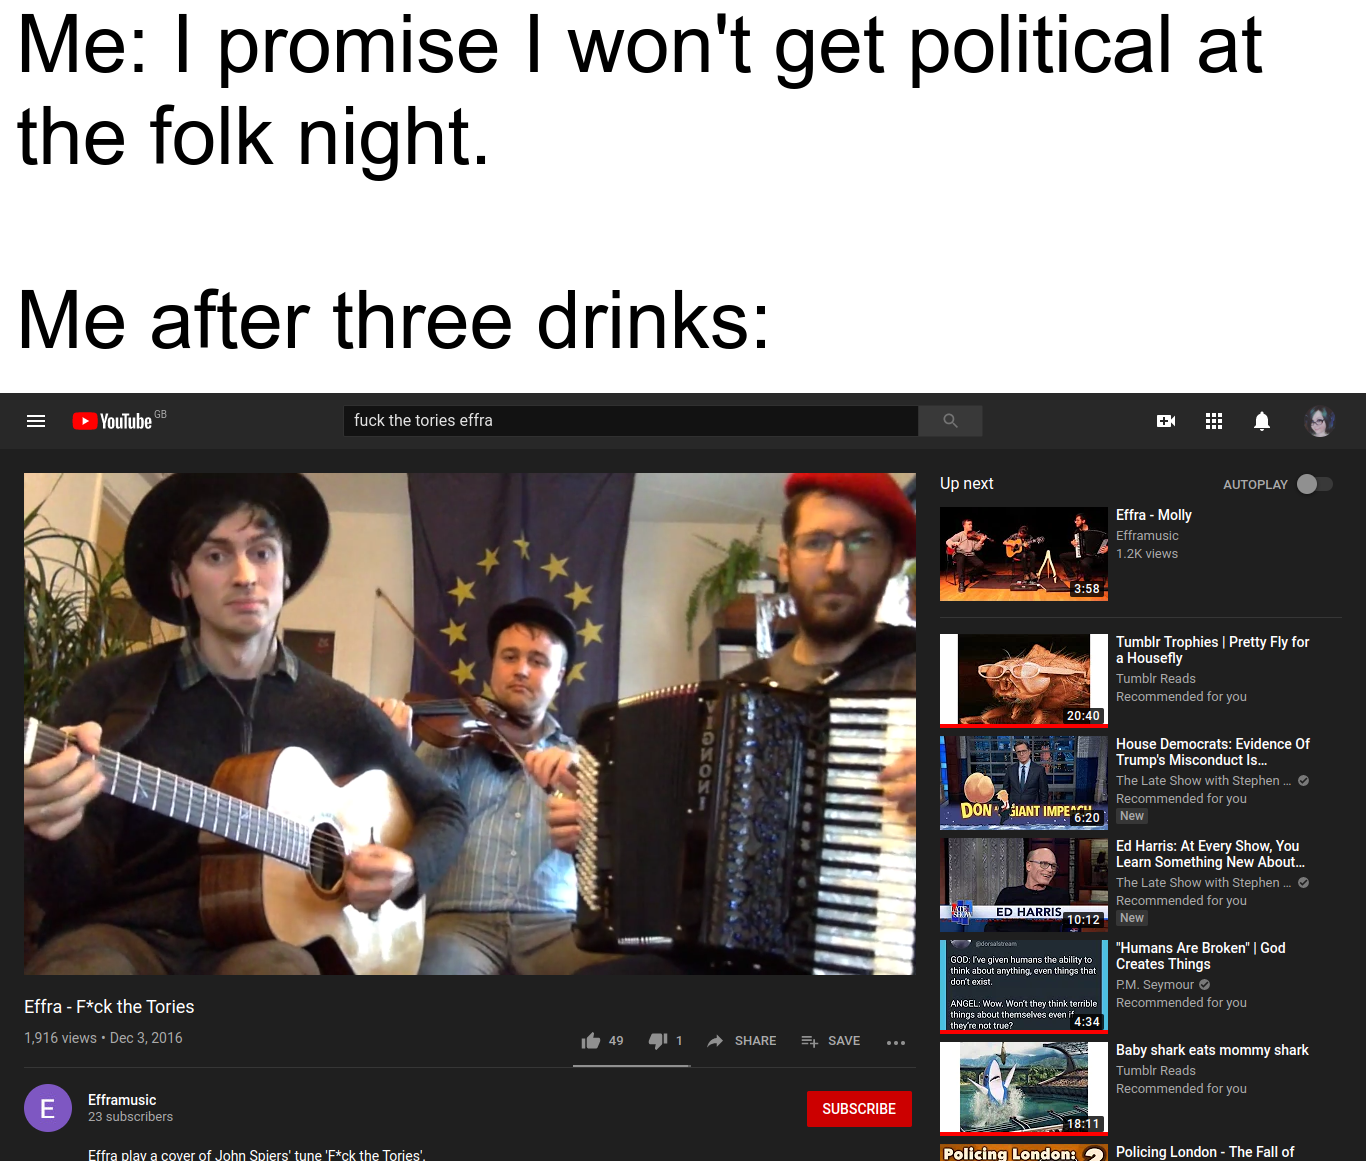 comedy central new - Me I promise I won't get political at the folk night Me after three drinks Soutube fuck the tories offra Autoplay Etra Malay Tumblr Trophies Pretty Fly for Tutar House Gerrierat Evidence of Trump Mosconduct in The show womples Dom Ed 